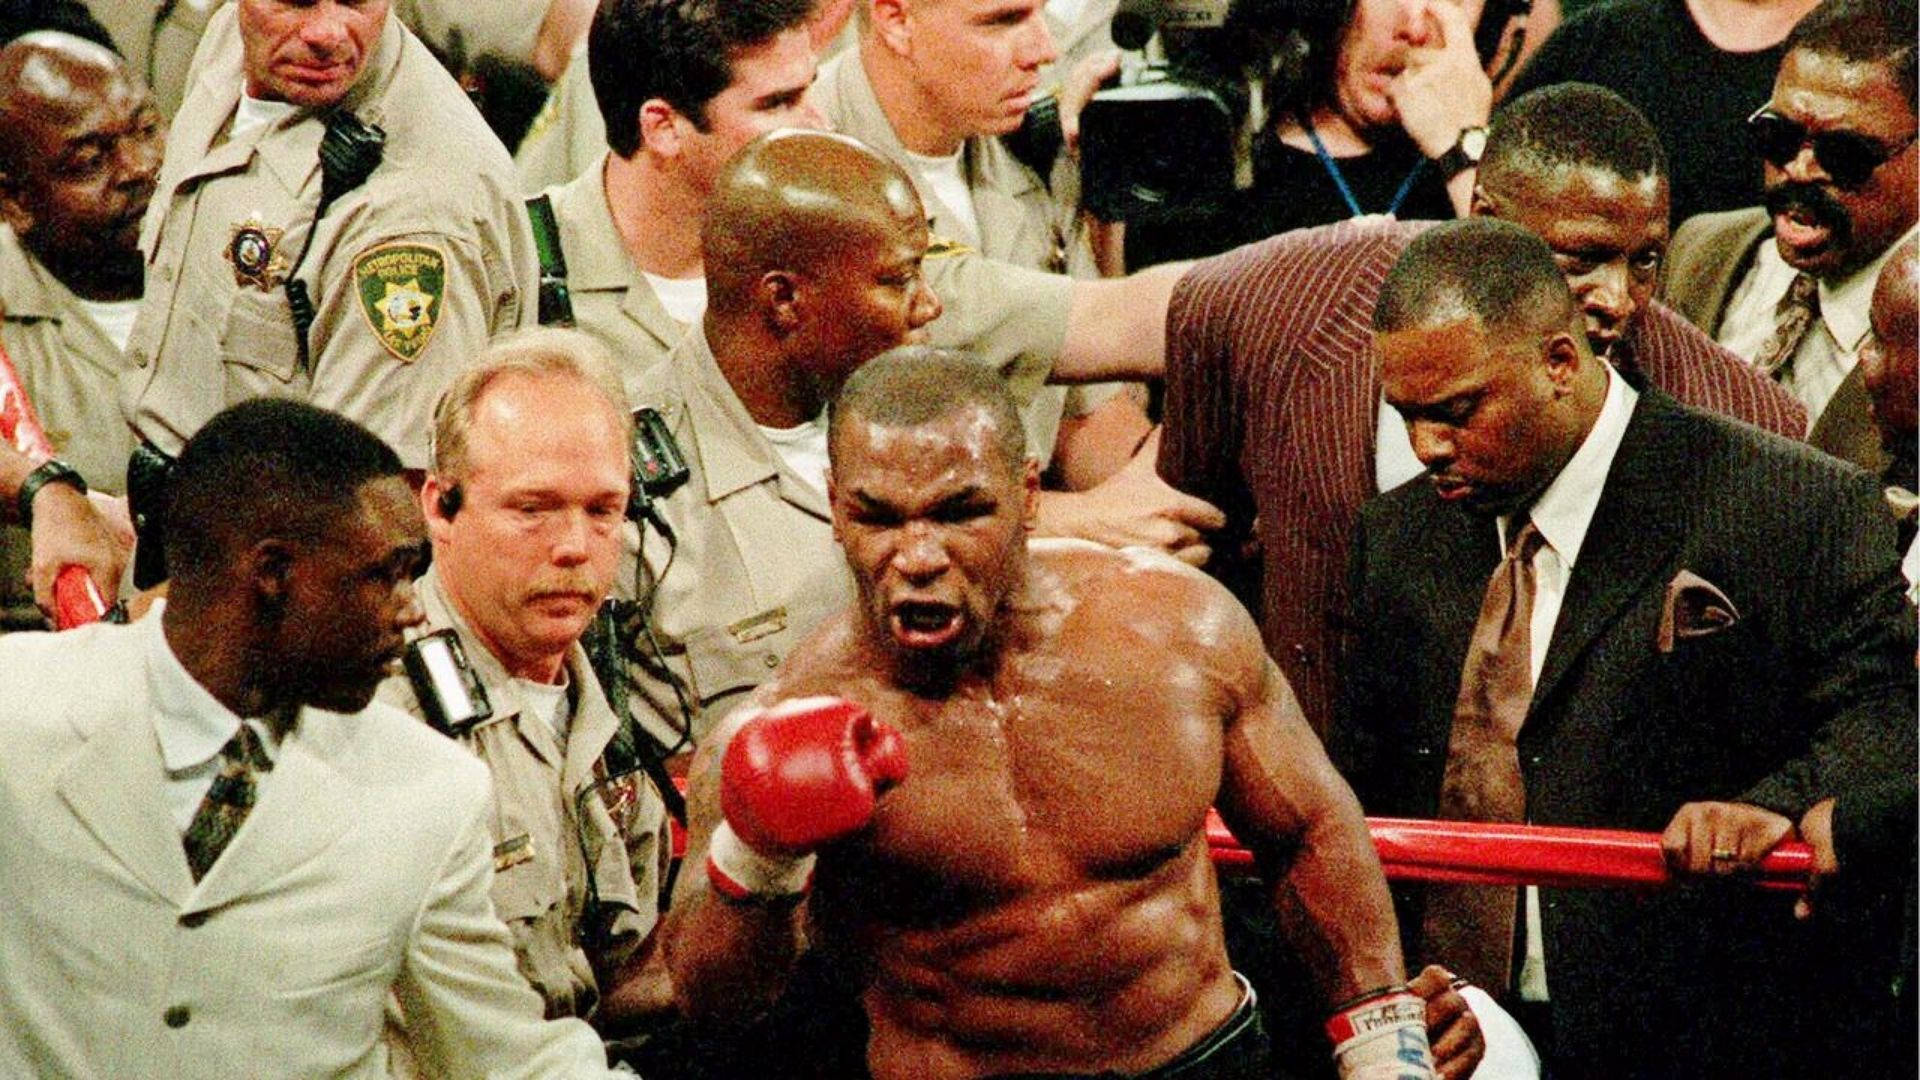 Angry Mike Tyson